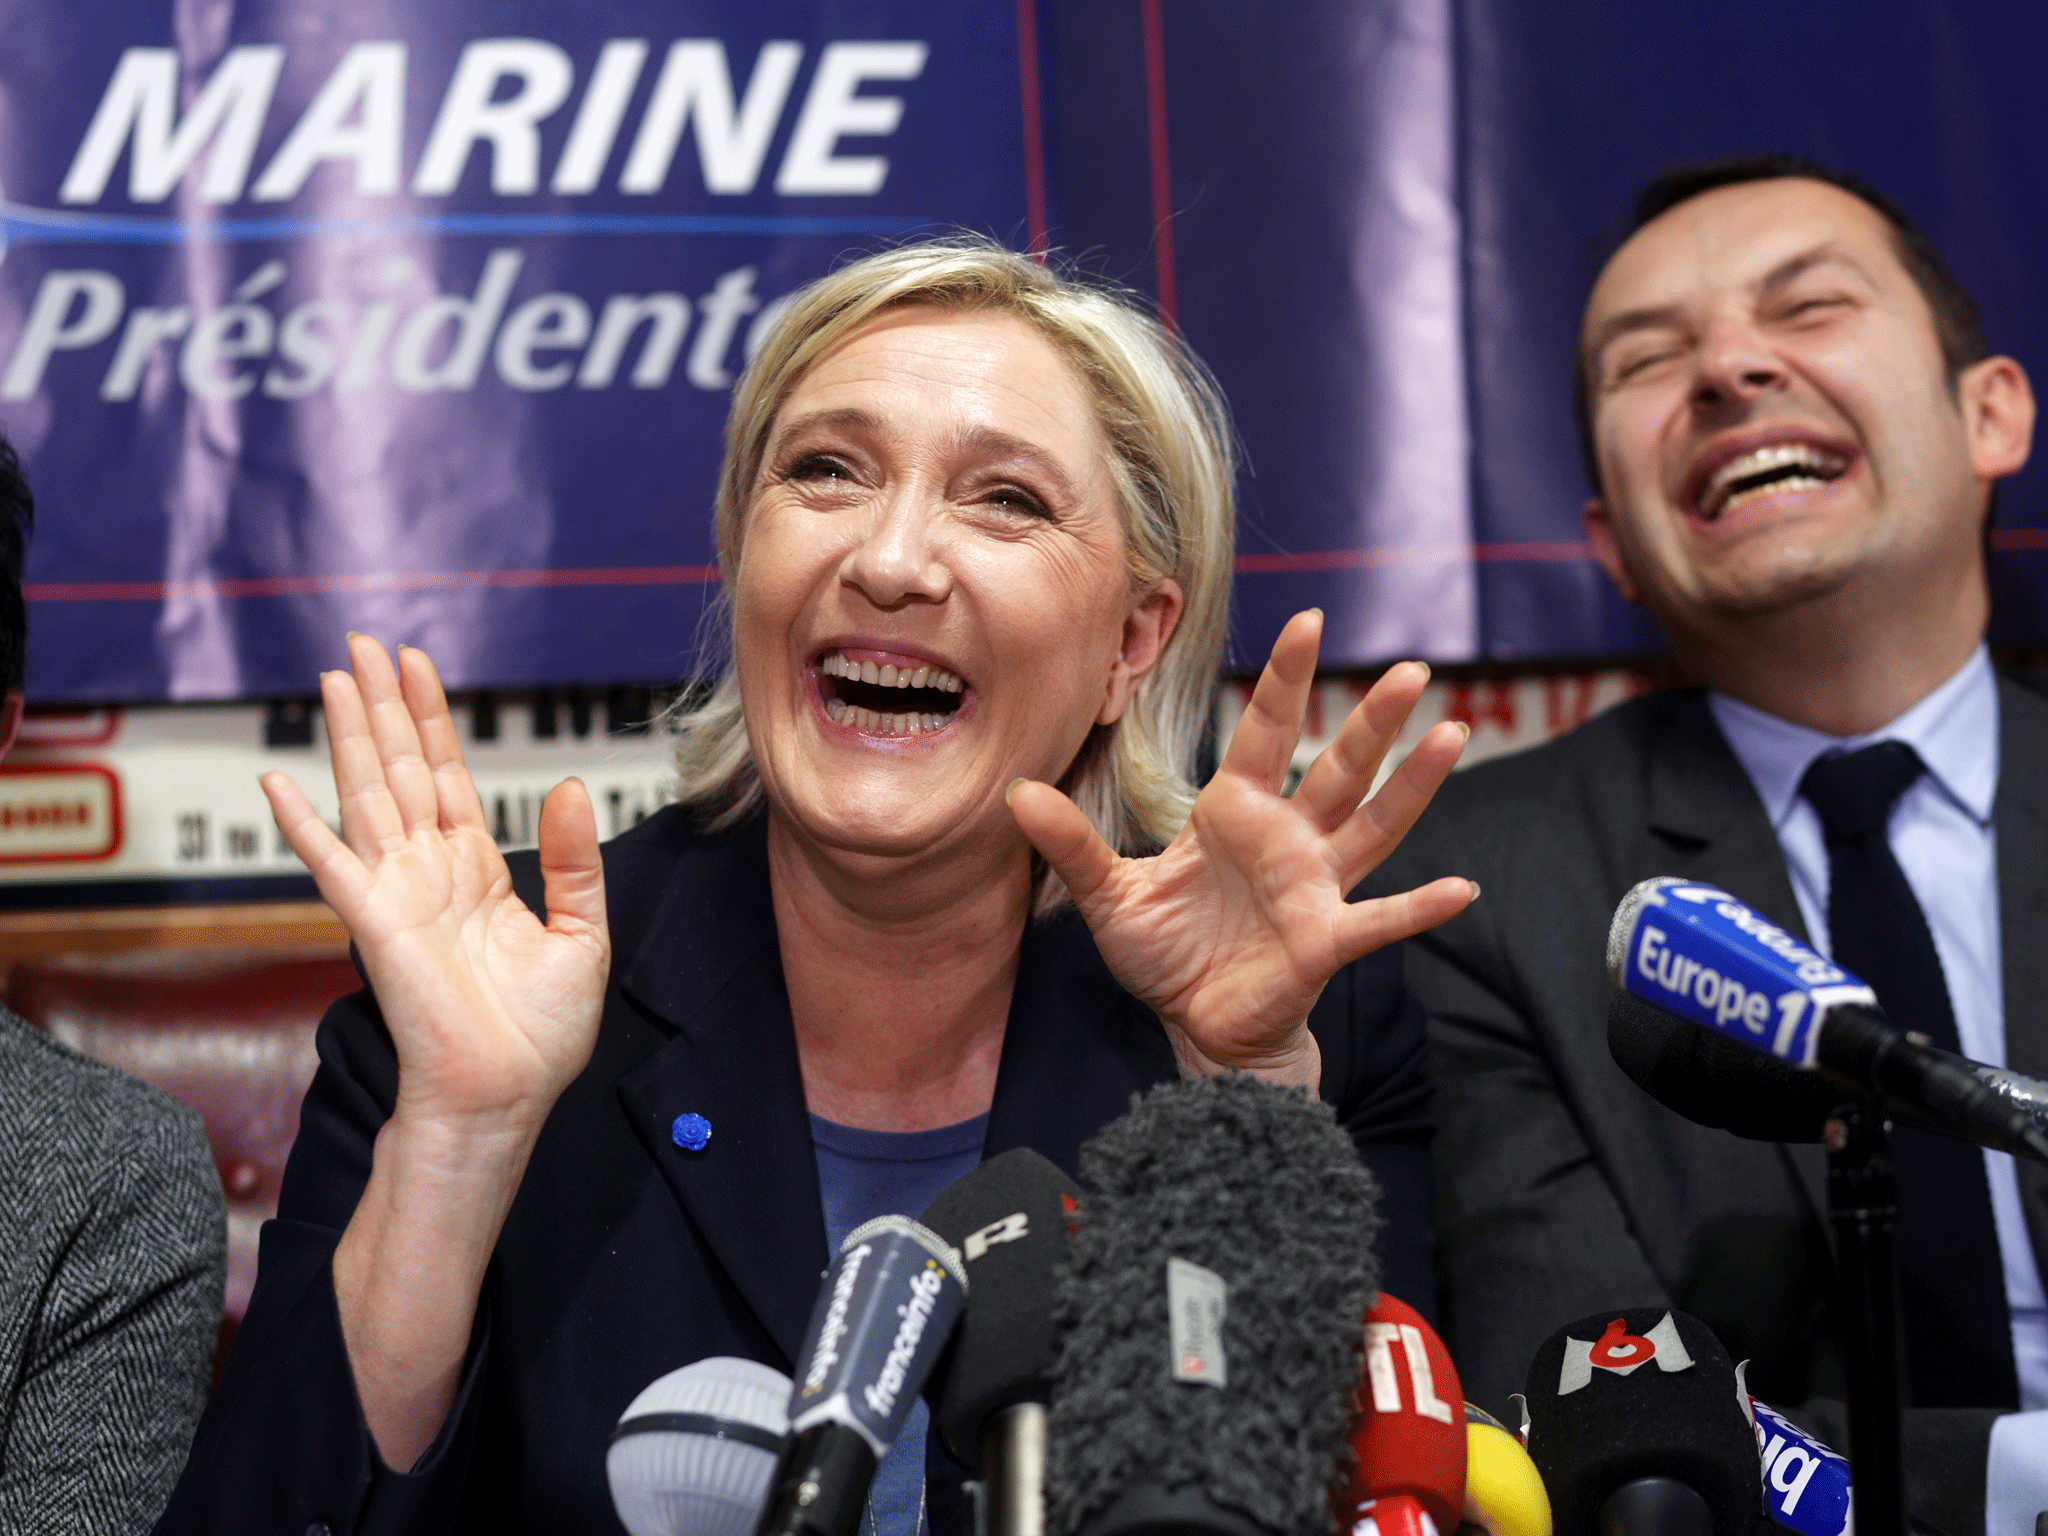 Marine Le Pen's chief of staff charged in misuse of EU funds probe